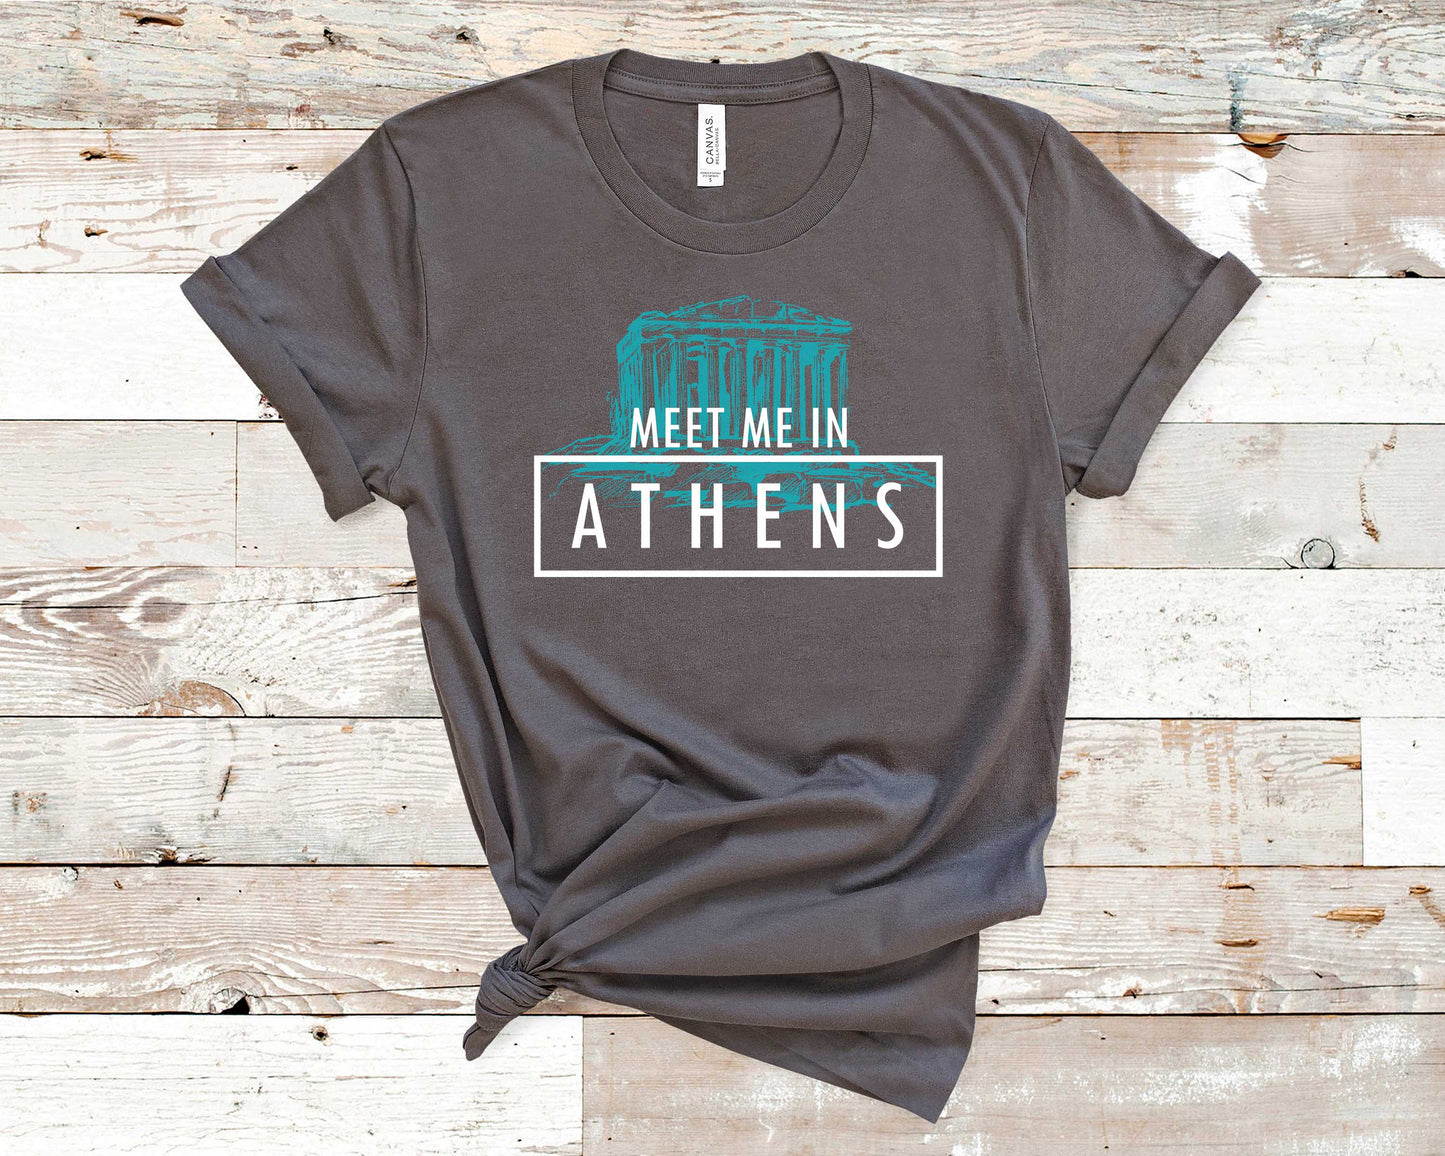 Meet Me in Athens - Travel/Vacation